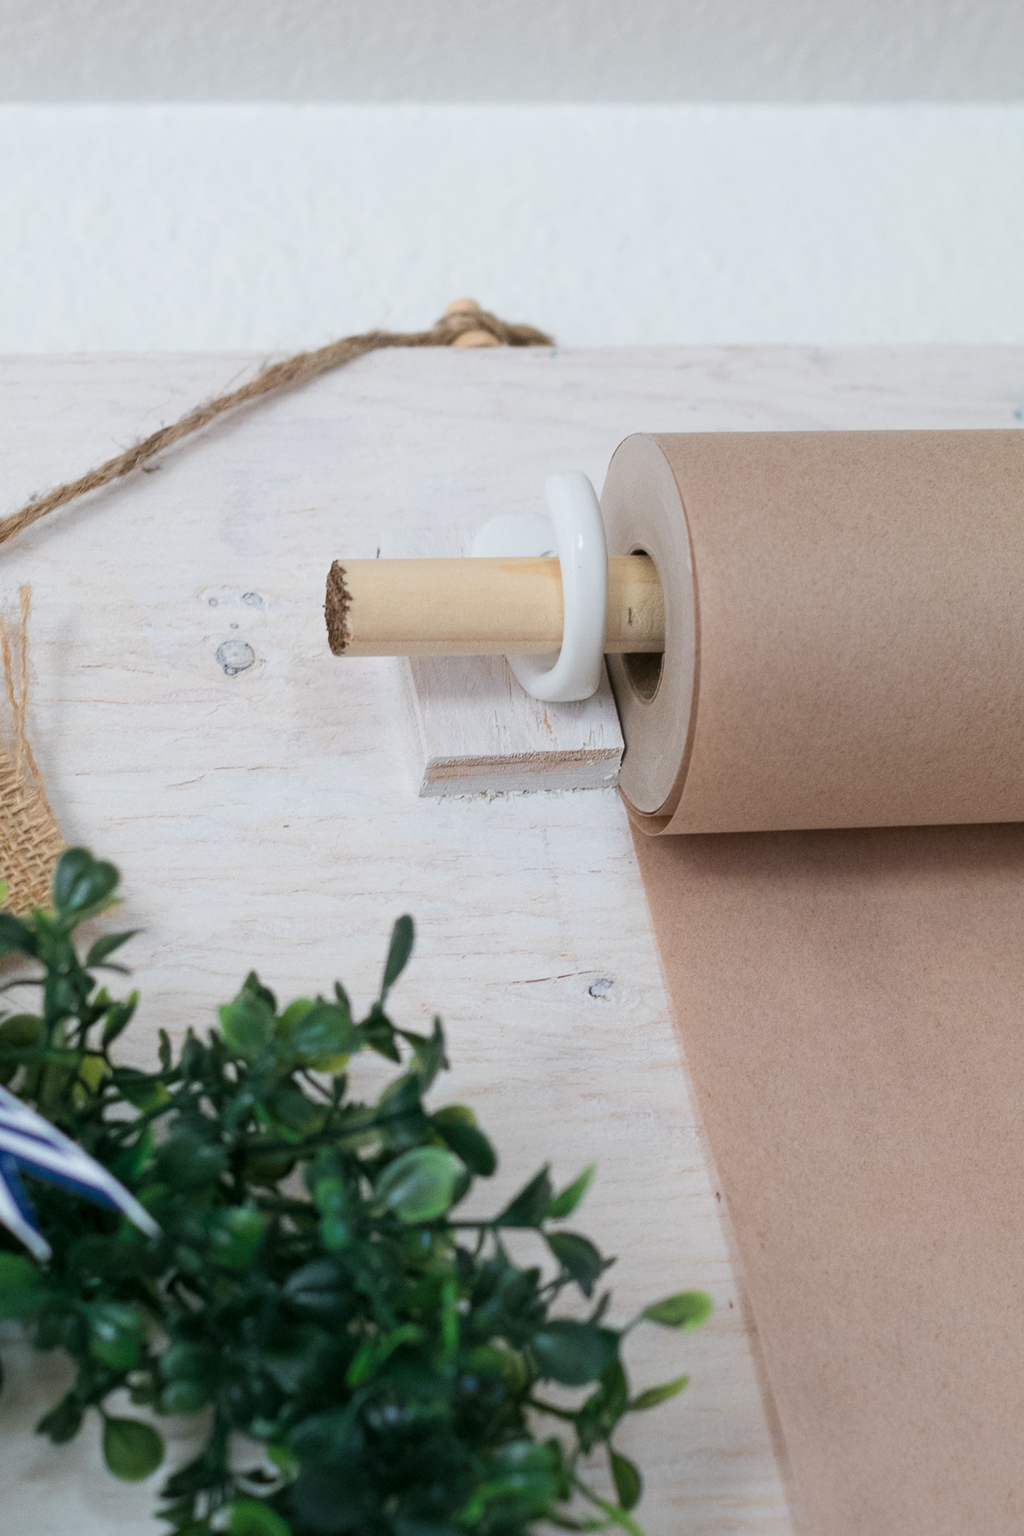 Attaching a paper roll to your family command center